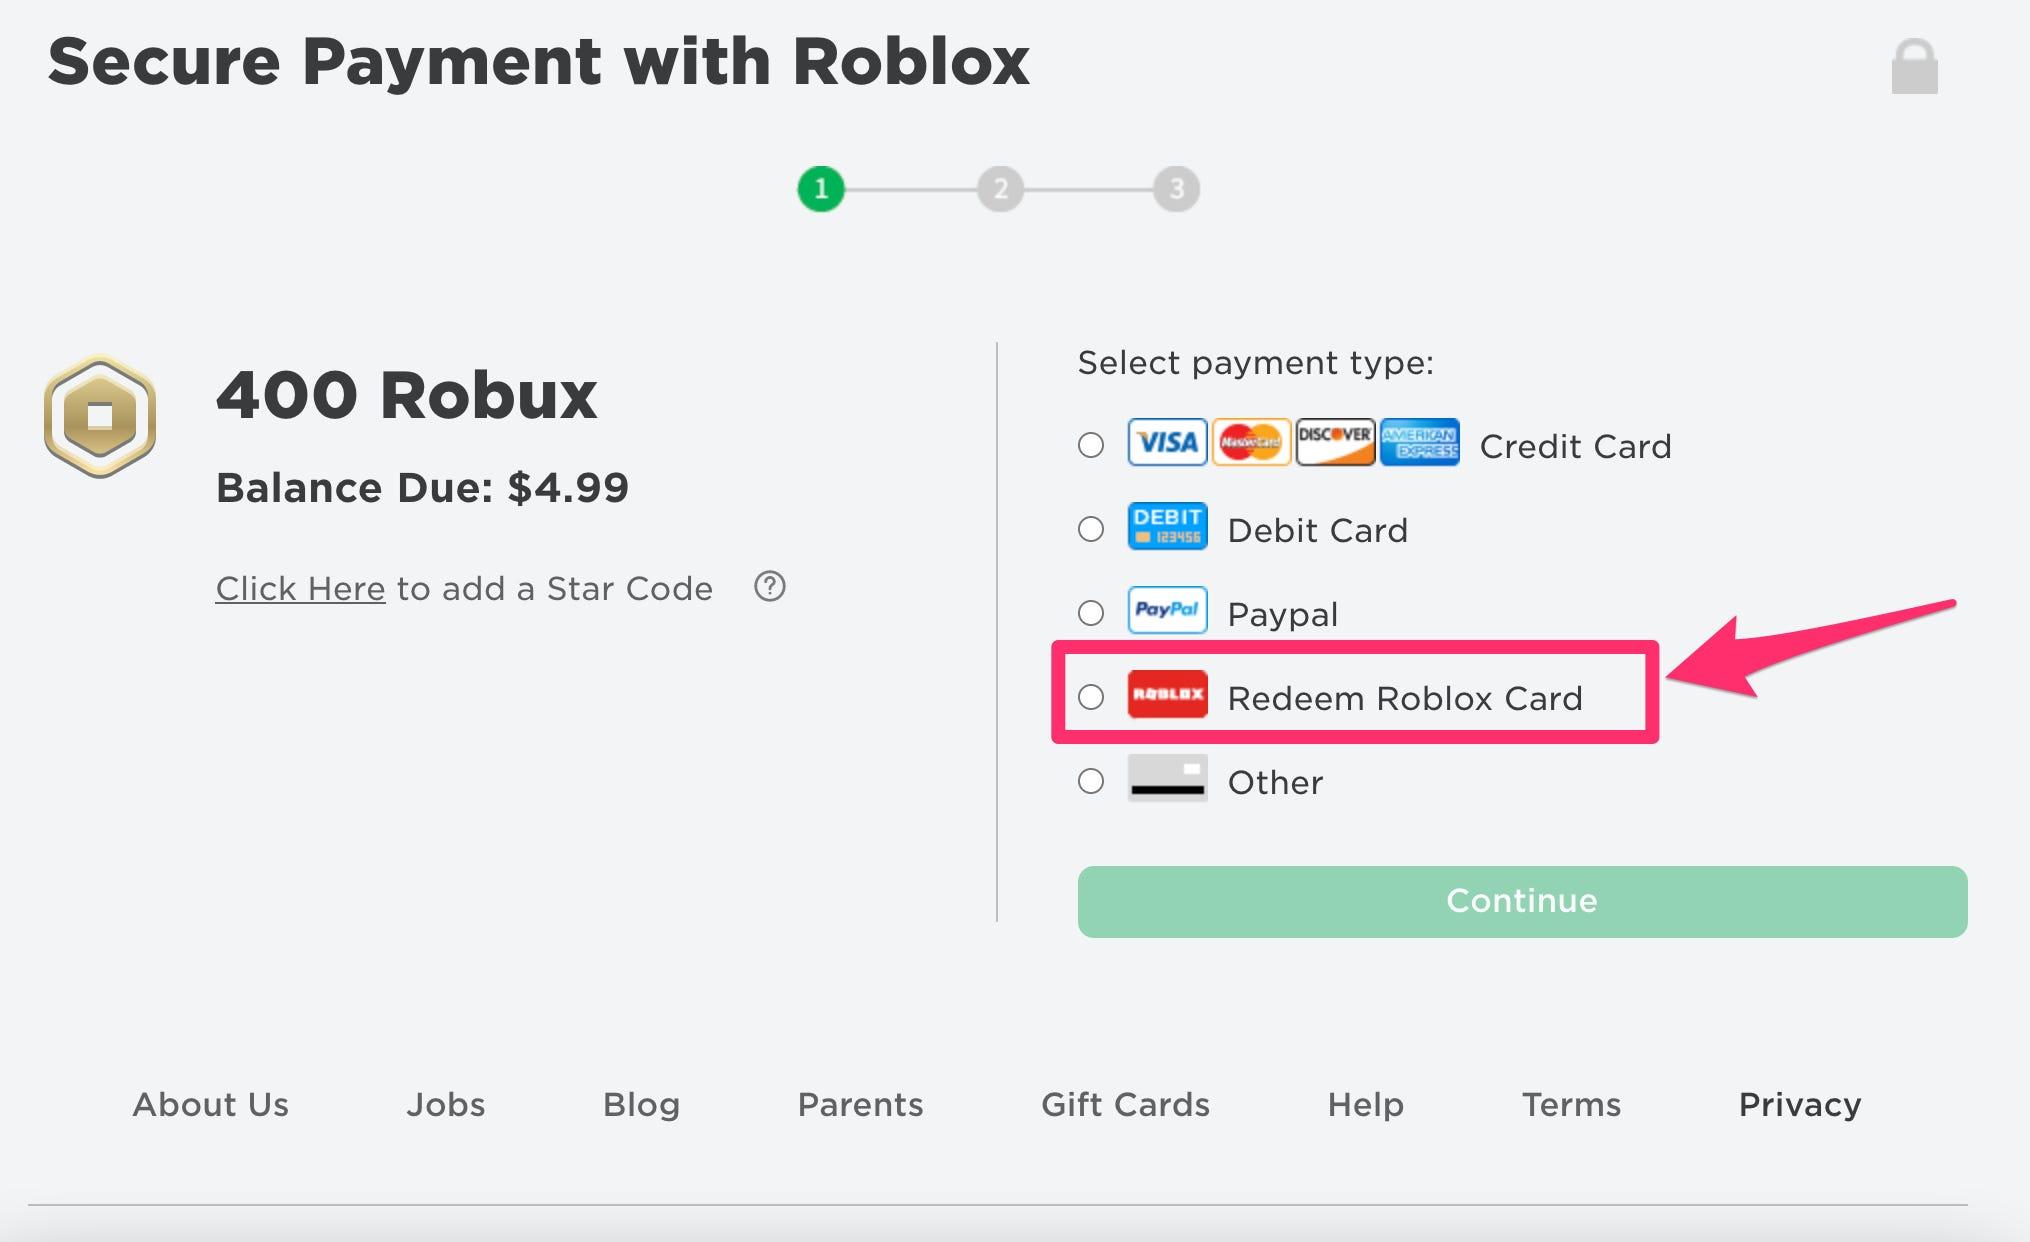 How To Redeem A Roblox Gift Card In 2 Different Ways So You Can Buy In Game Accessories And Upgrades Business Insider Africa - how buys robux with a visa debit gift card